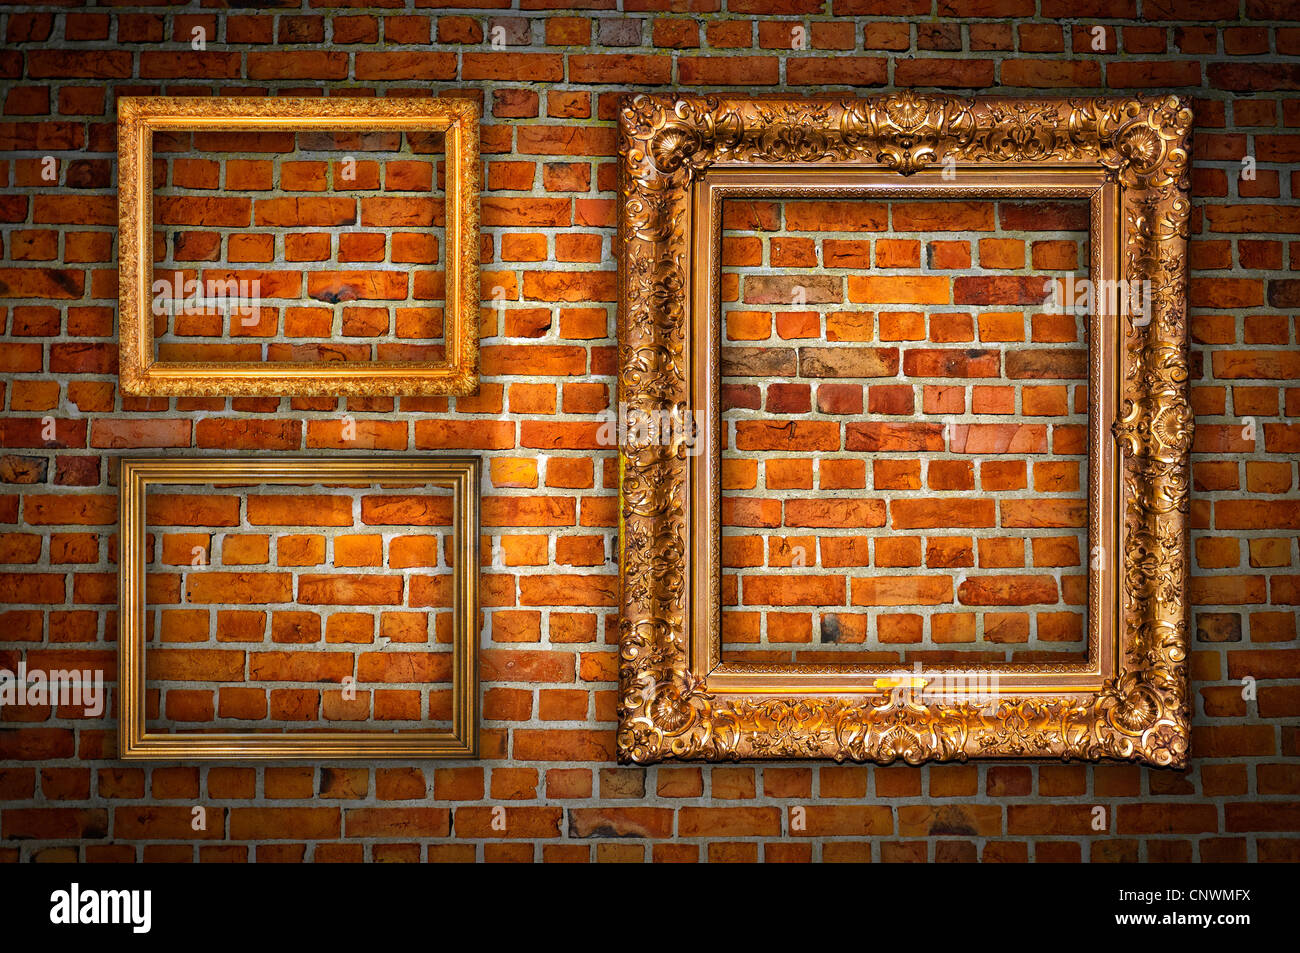 Old ornate golden frames hanging on a brick wall. Stock Photo